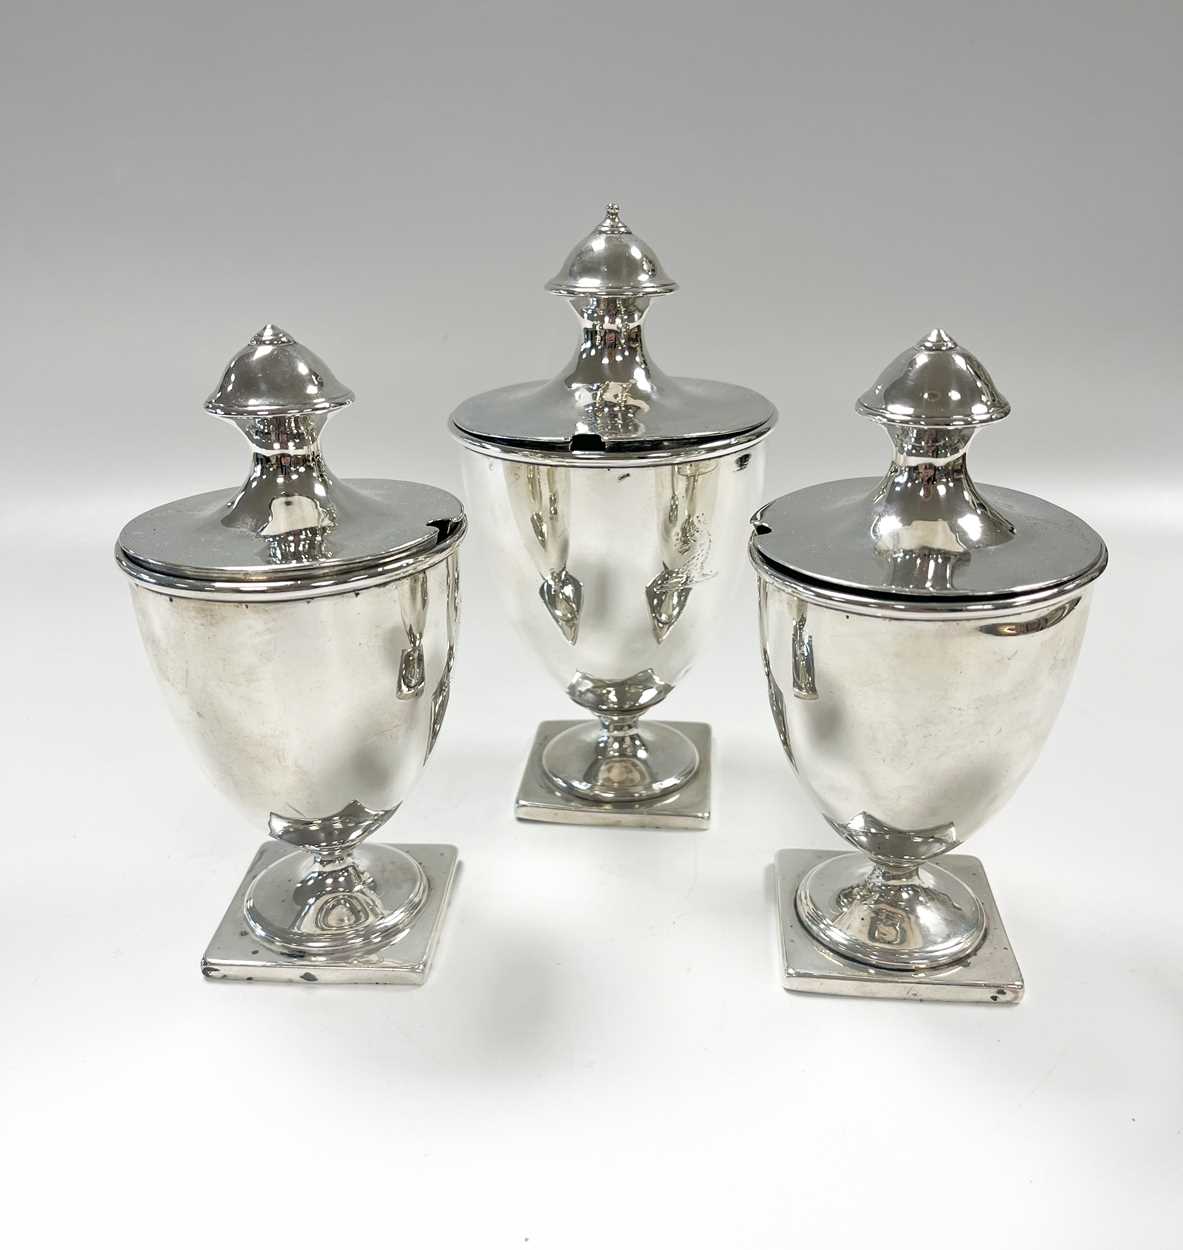 A set of 3 George III 18th century silver sugar vases with covers, - Image 2 of 8